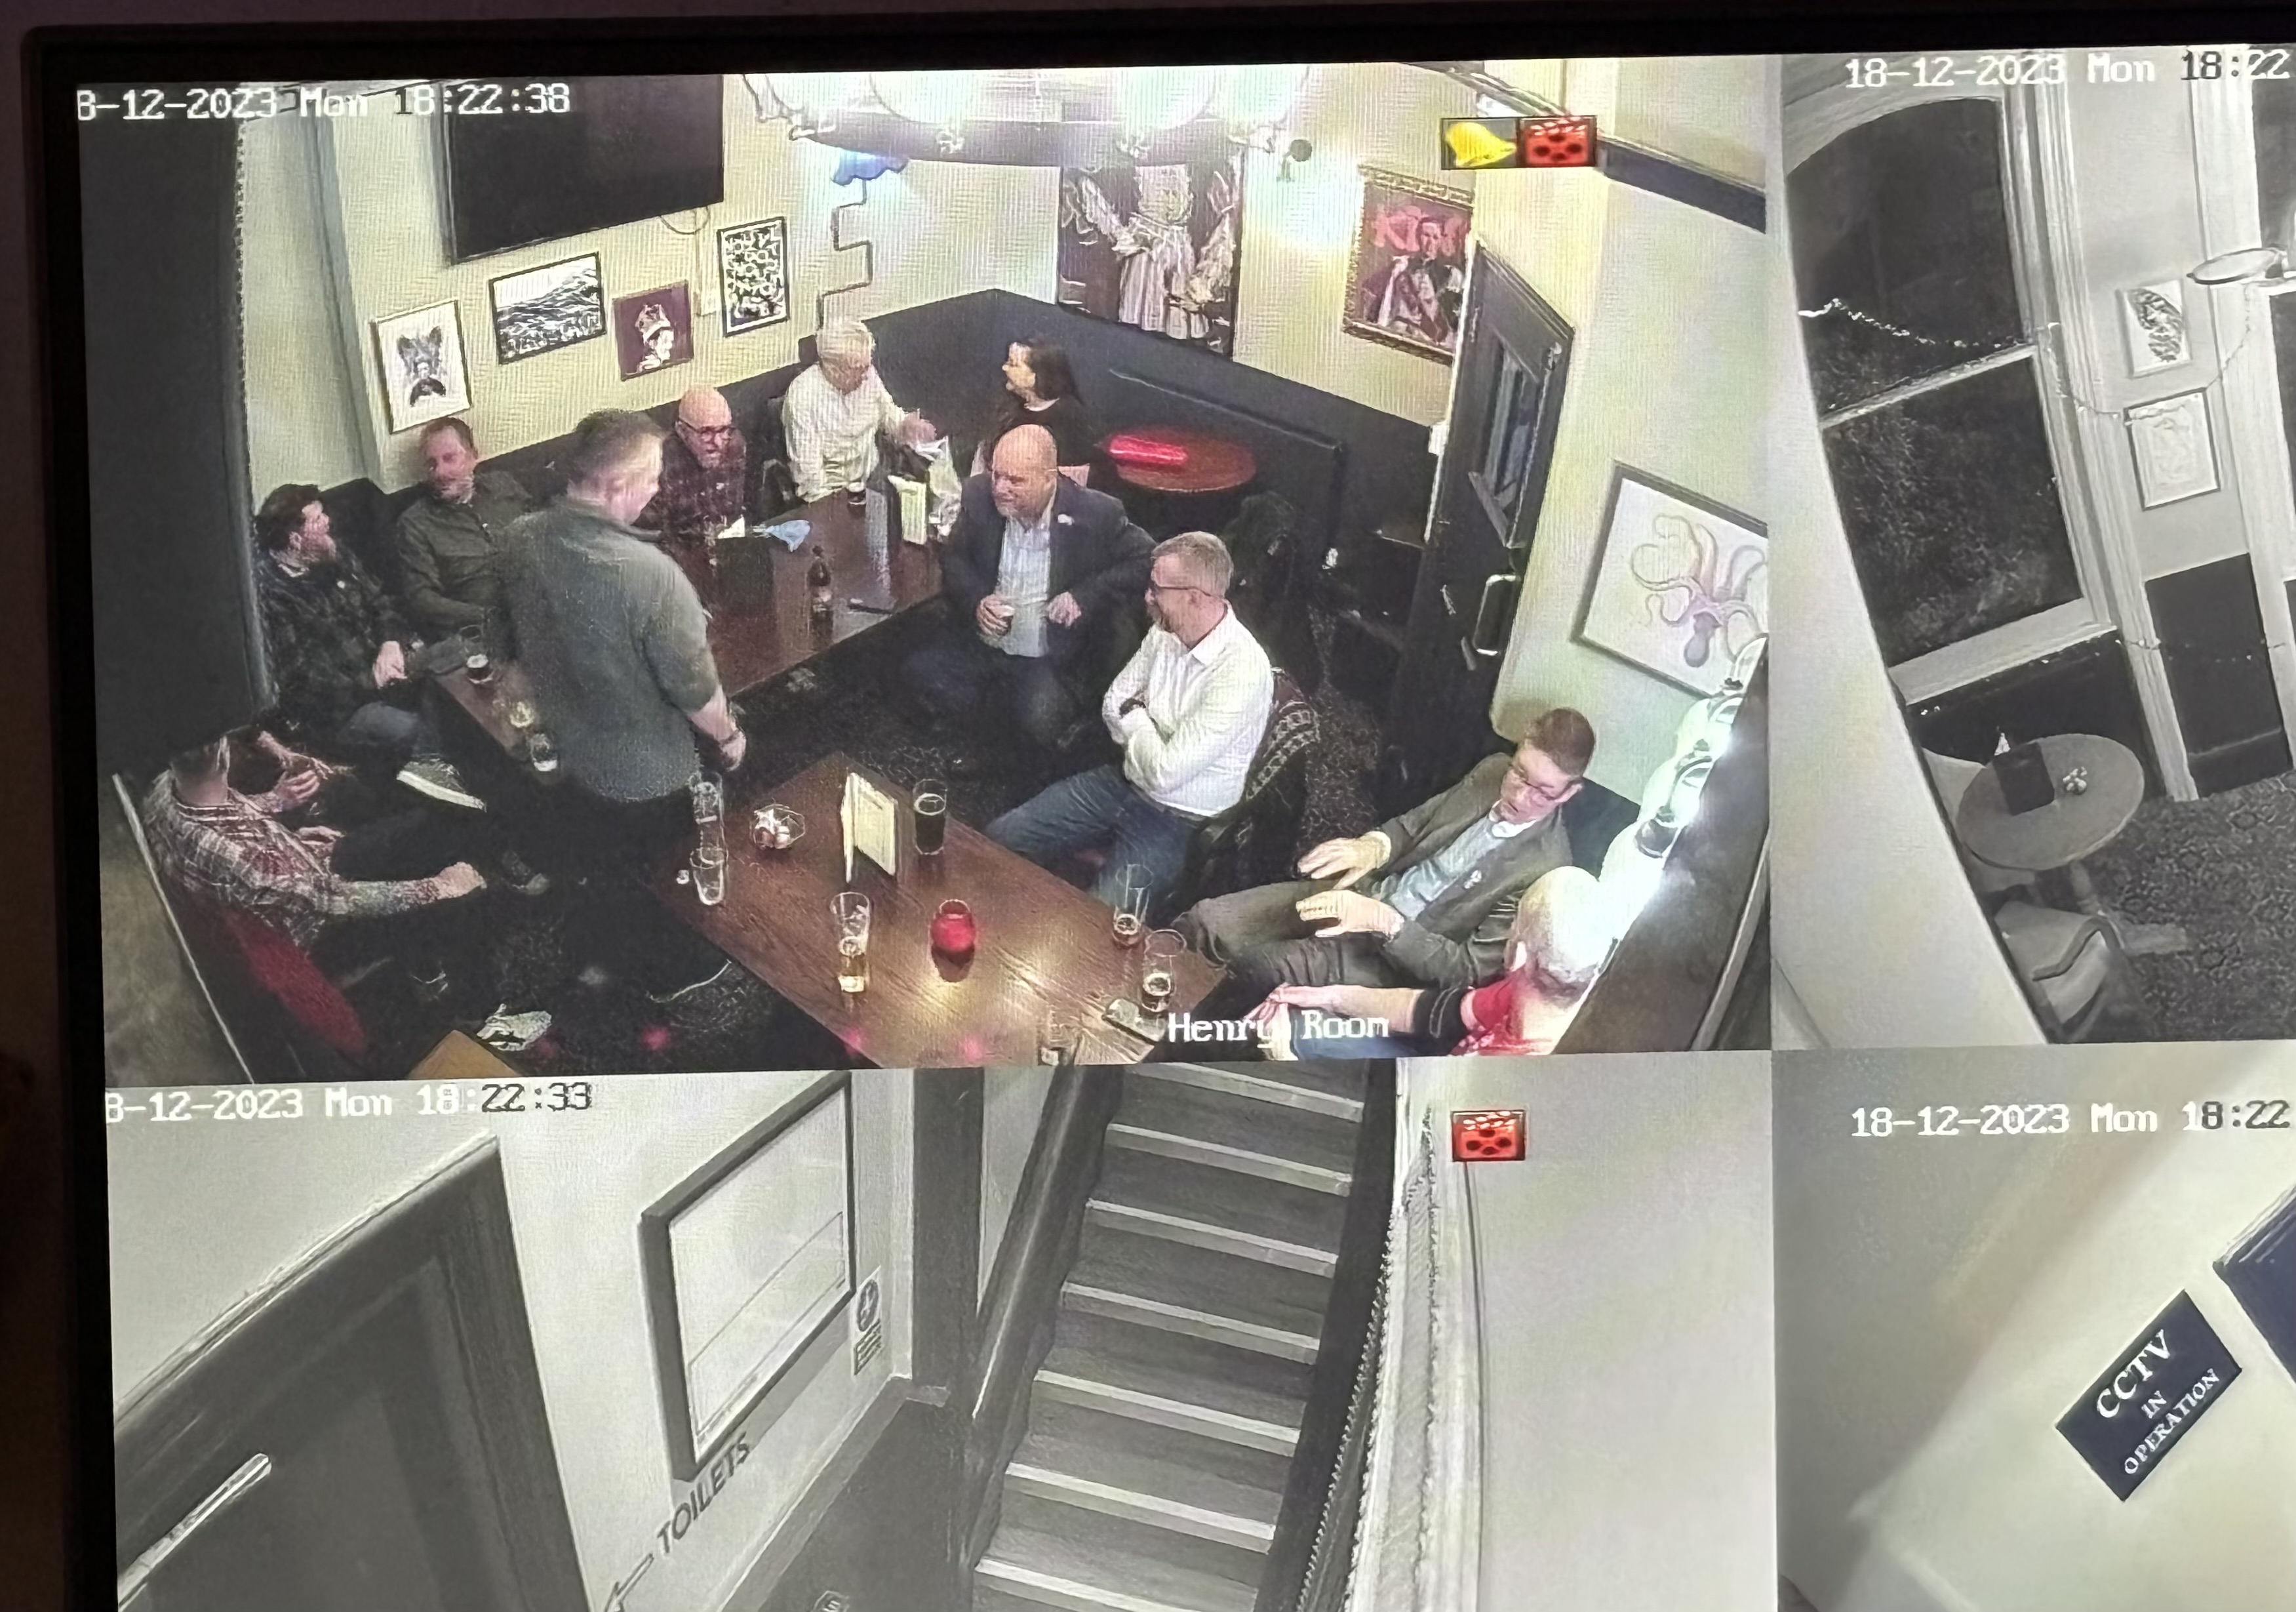 Keeping an eye on the WB-40 crew in their upstairs room via the pub’s CCTV system.